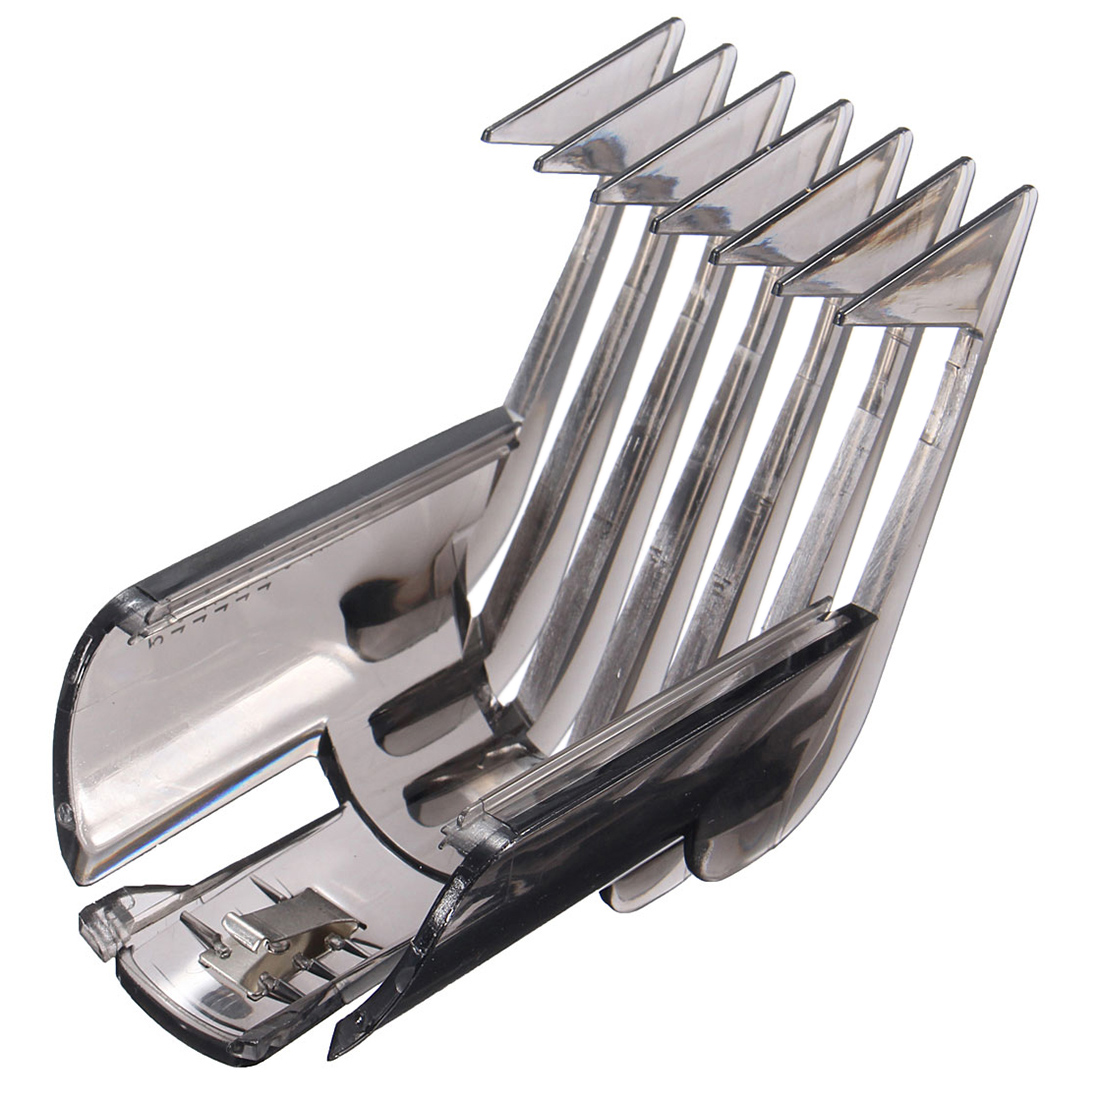 Hair Clippers Beard Trimmer comb attachment for Philips QC5130 / 05/15/20/25/35 3-21mm